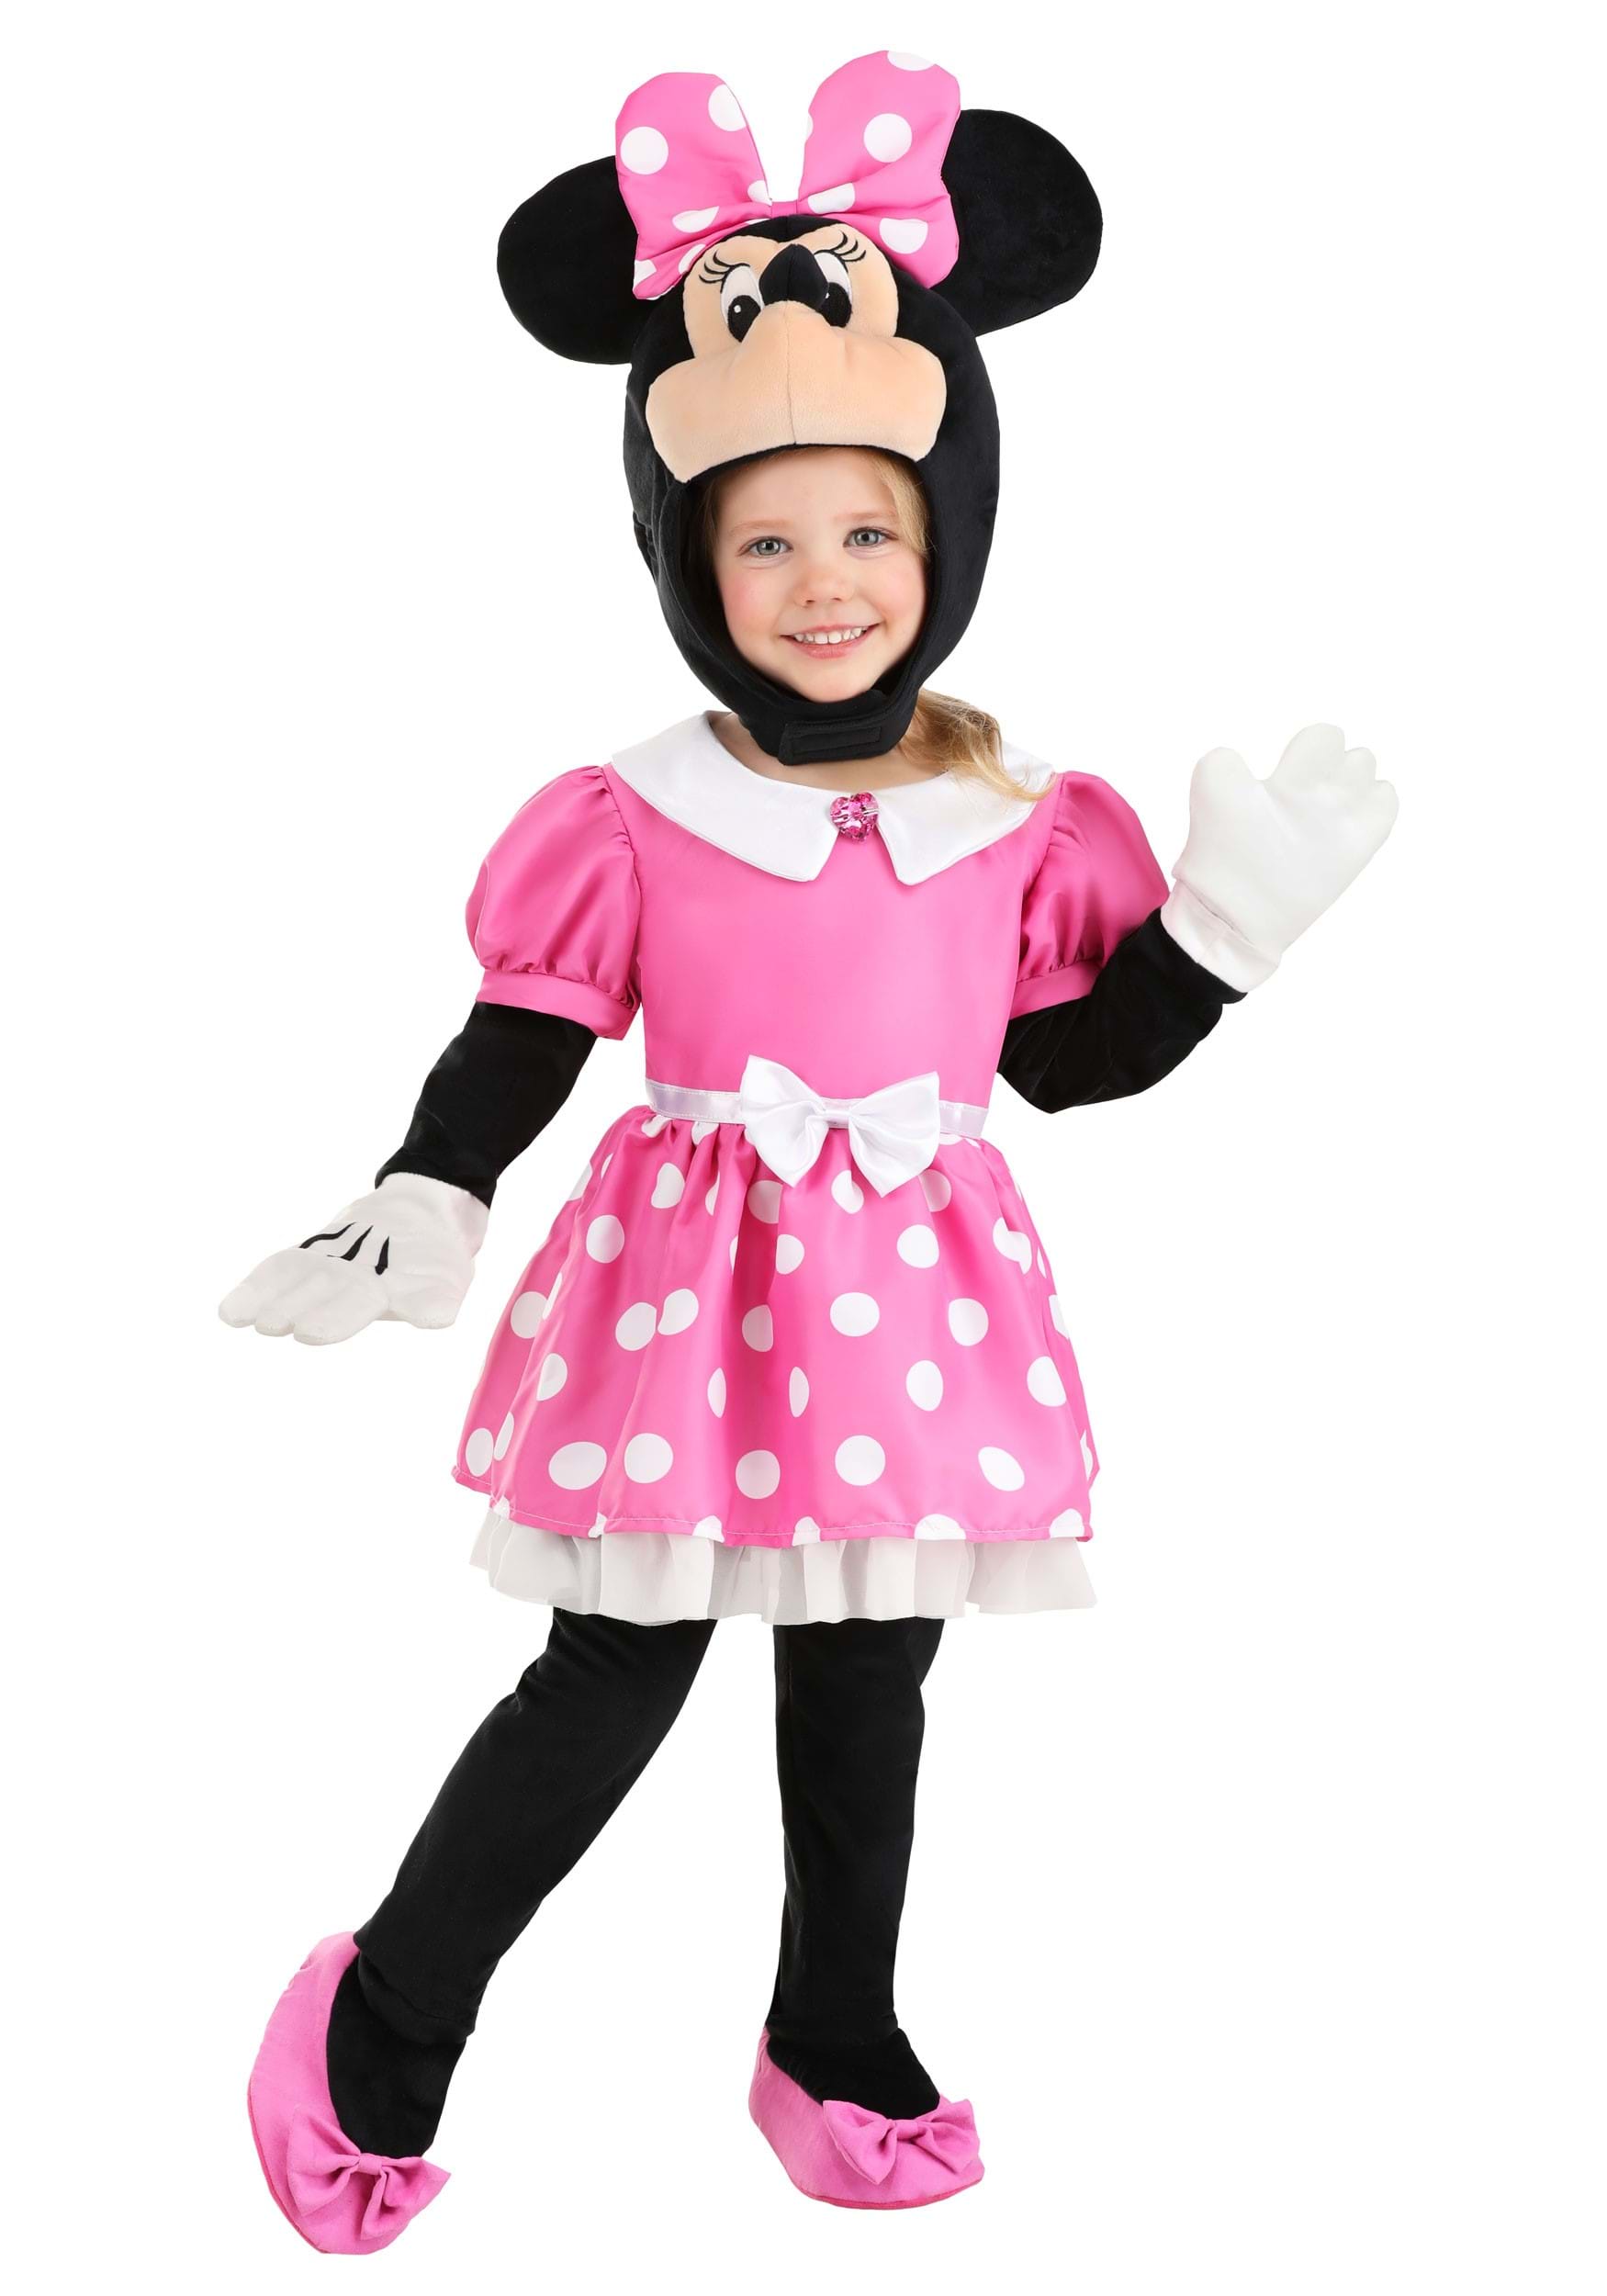 Photos - Fancy Dress Toddler FUN Costumes Sweet Minnie Mouse  Costume Black/Pink/White F 